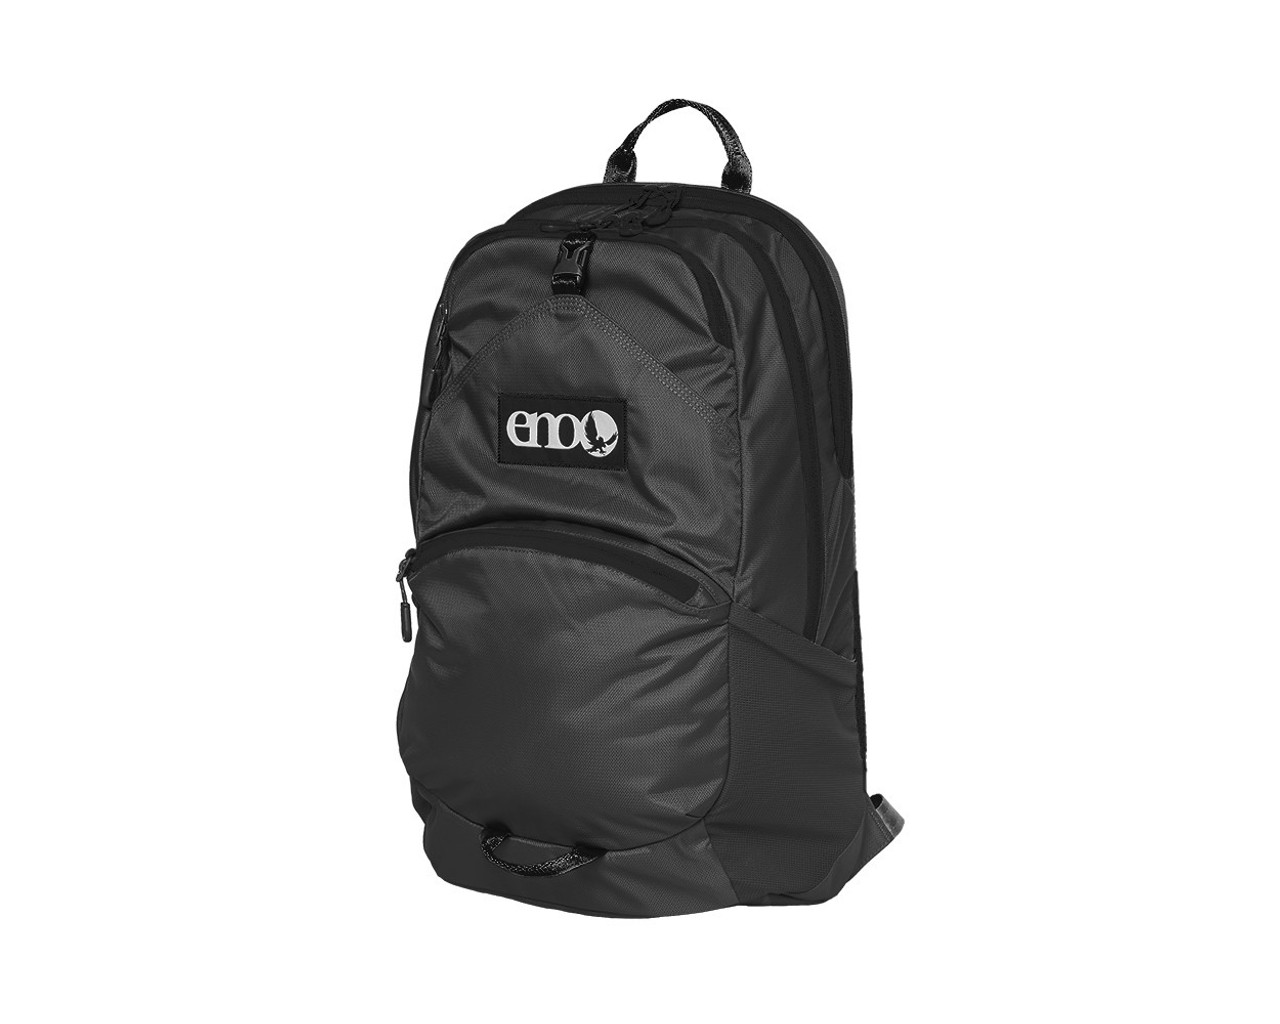 Eno Manchester Daypack Grey Charcoal 23L